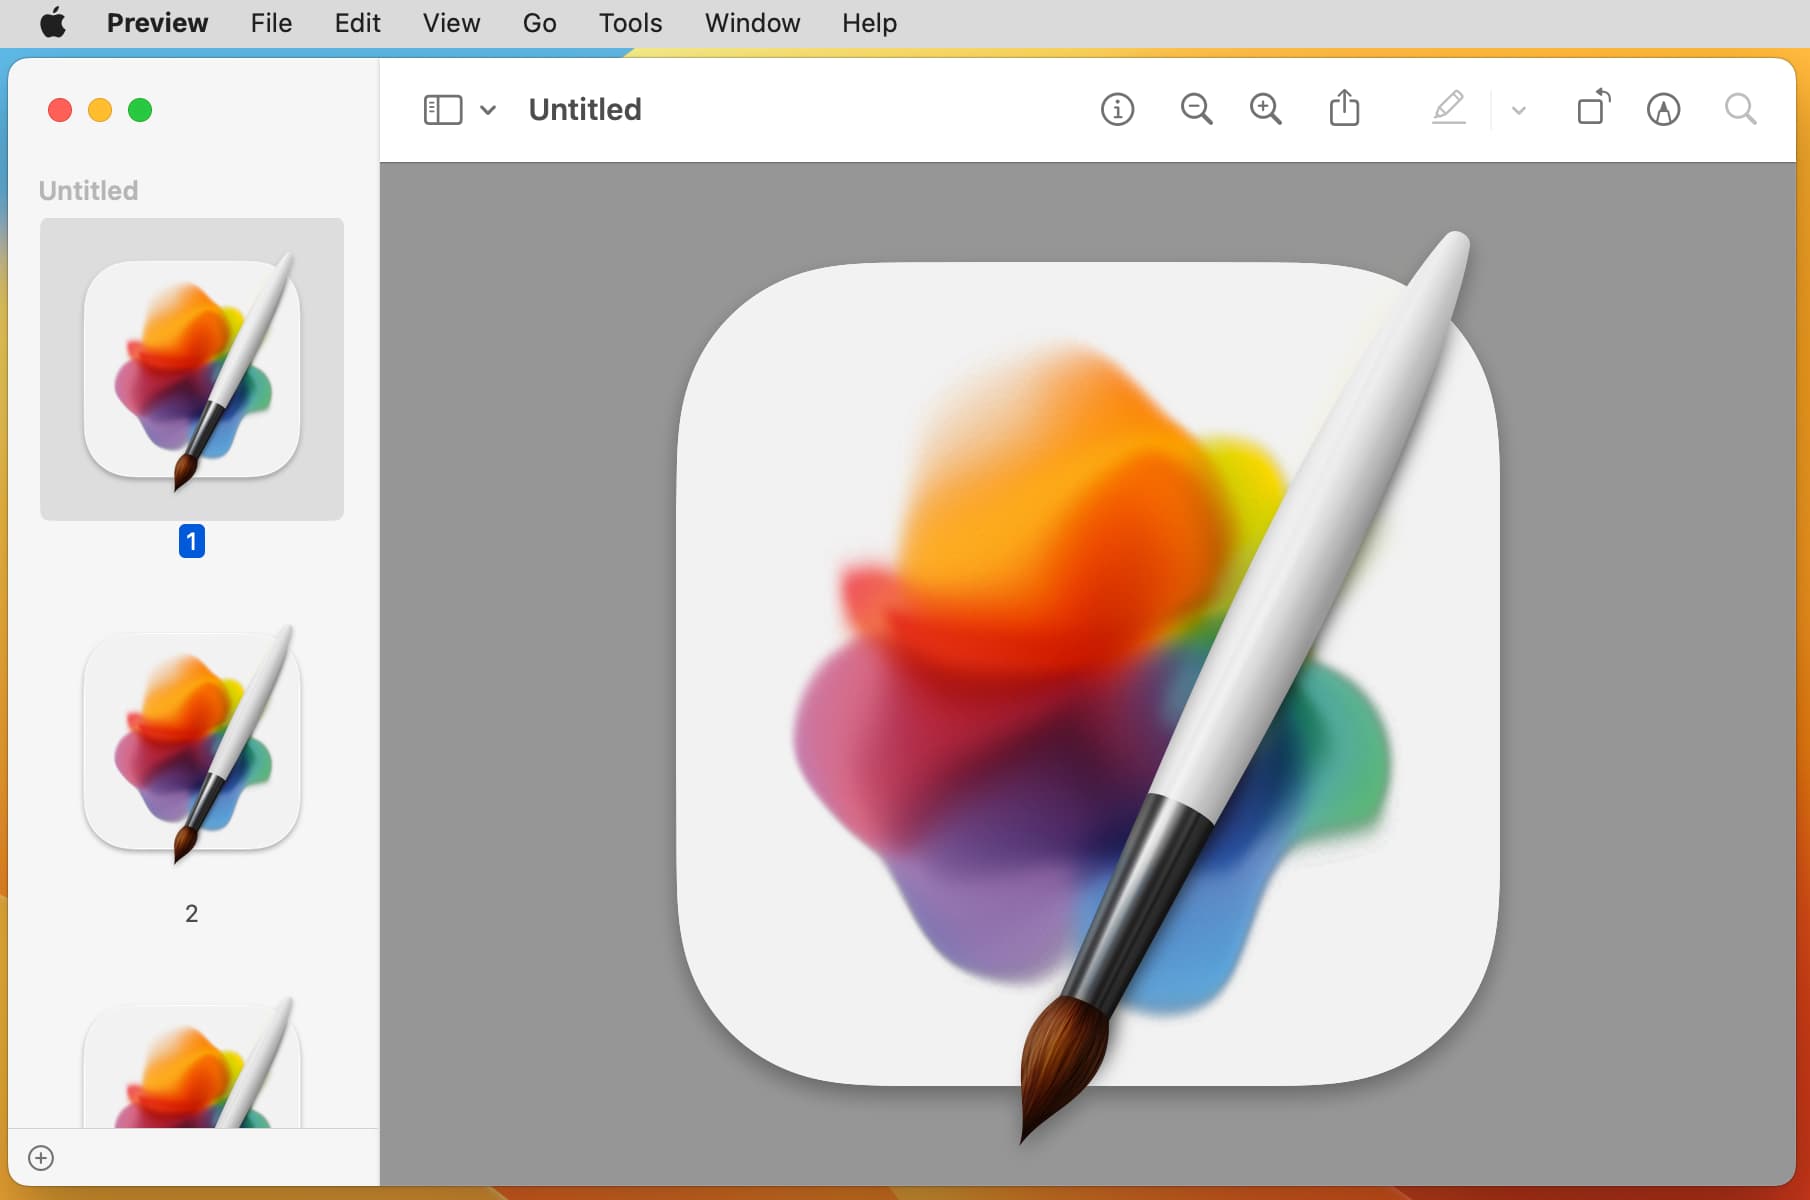 Extracted Mac app icon pasted in Preview